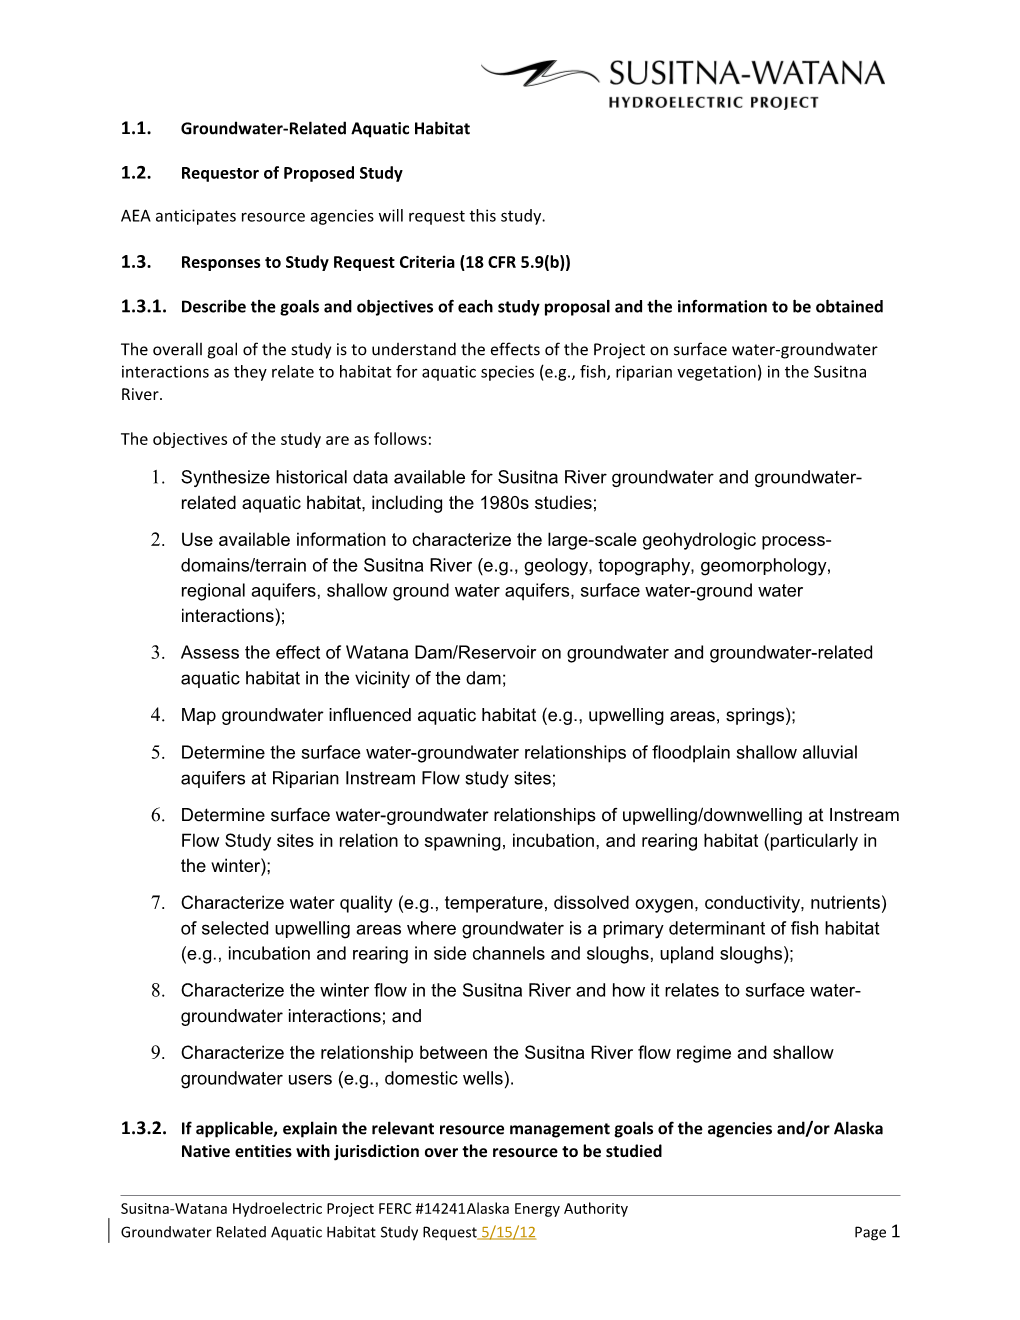 Outline for Preliminary Study Concepts and 2002 Data Collection Methods Document